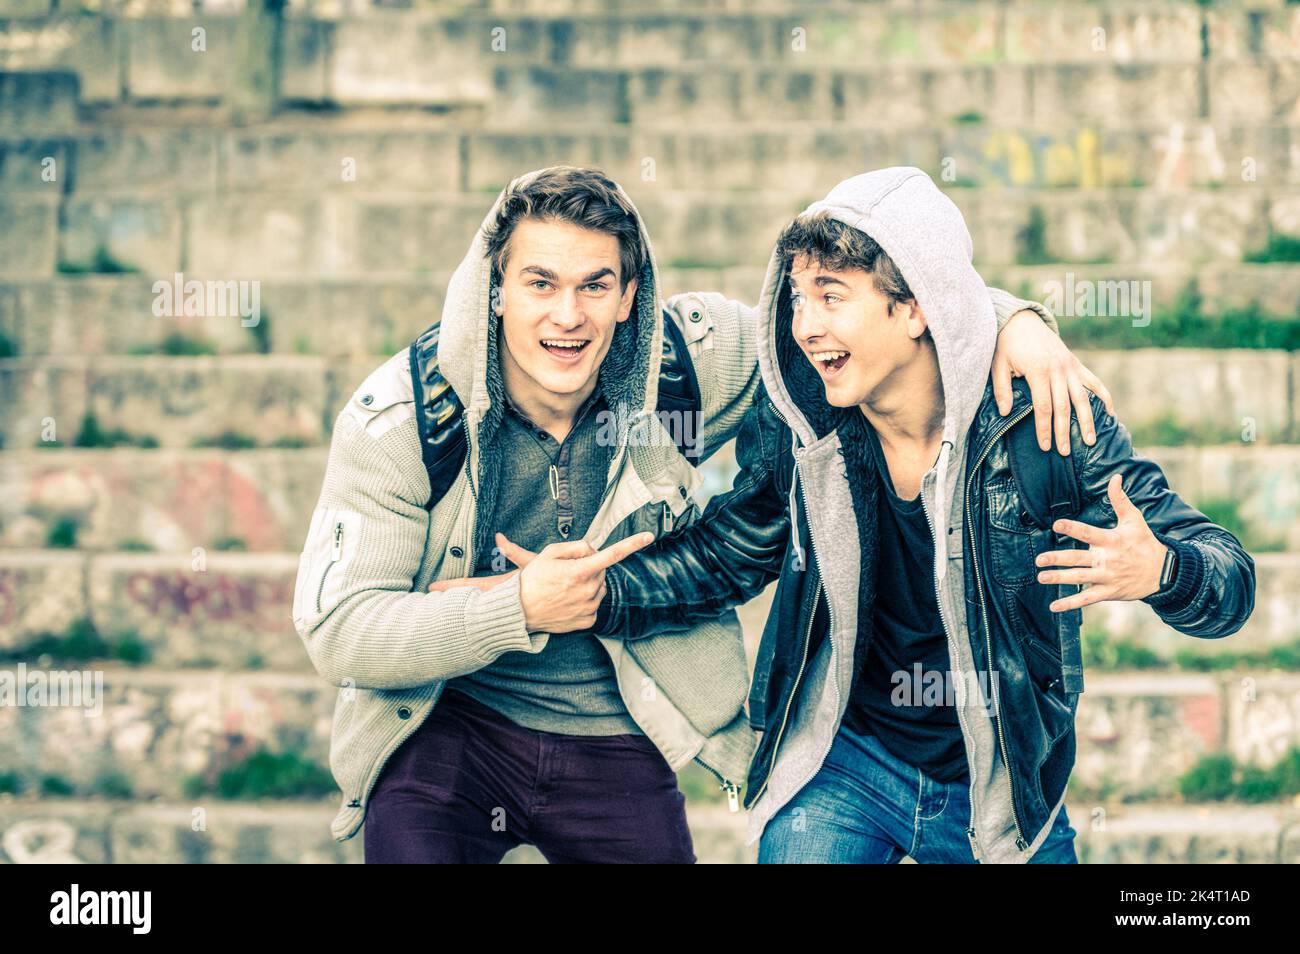 Young hipster brothers having fun with each other - Best friends sharing free time together in urban area outdoors - Handsome guys with winter fashion Stock Photo